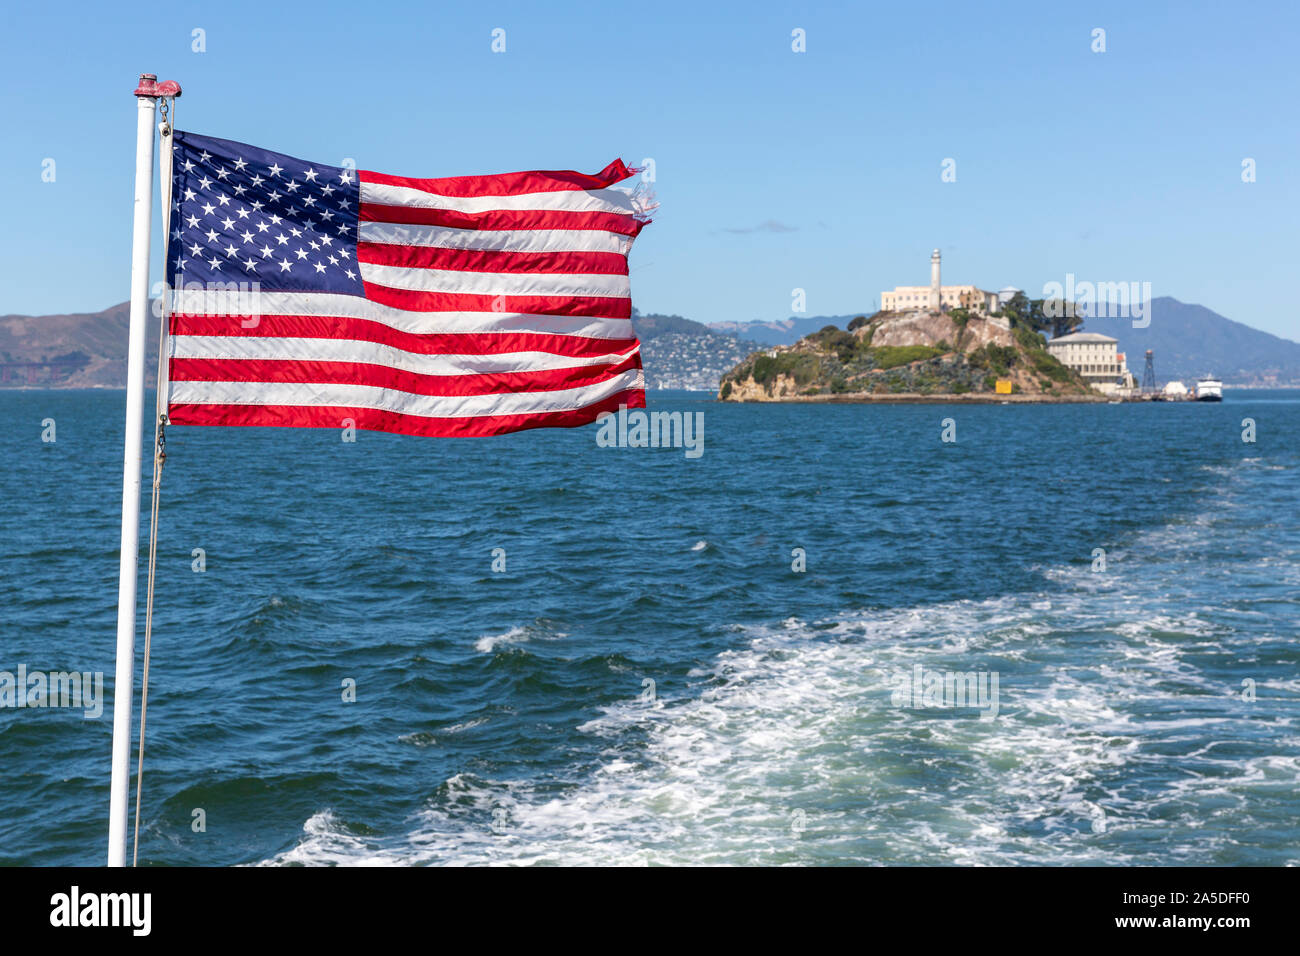 The Stars and Stripes flag flying from the back of a boat with Alcatraz Island out of focus behind. Stock Photo